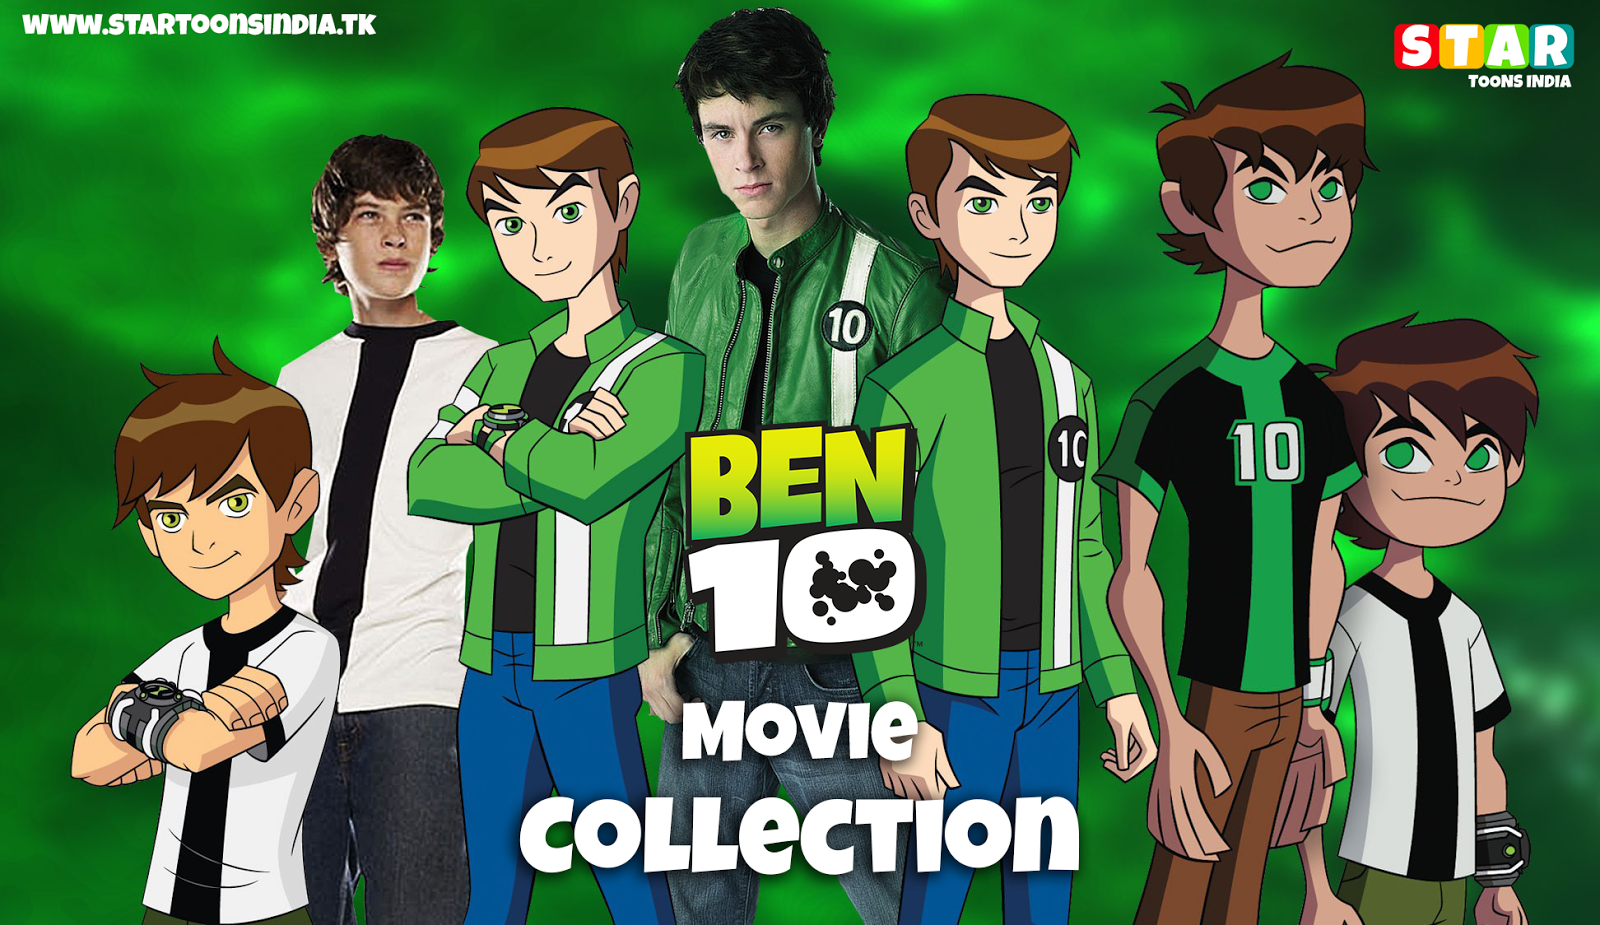 Star Toons India: Ben 10 Movie Collection in Hindi